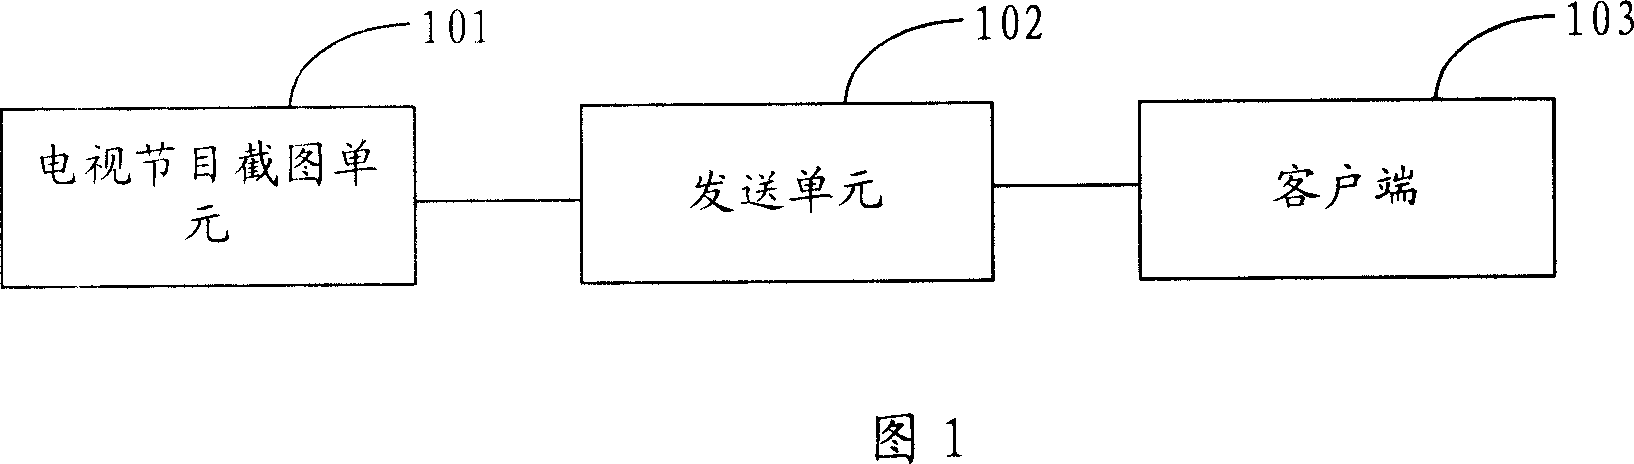 Network TV programme prebrowsing system and method